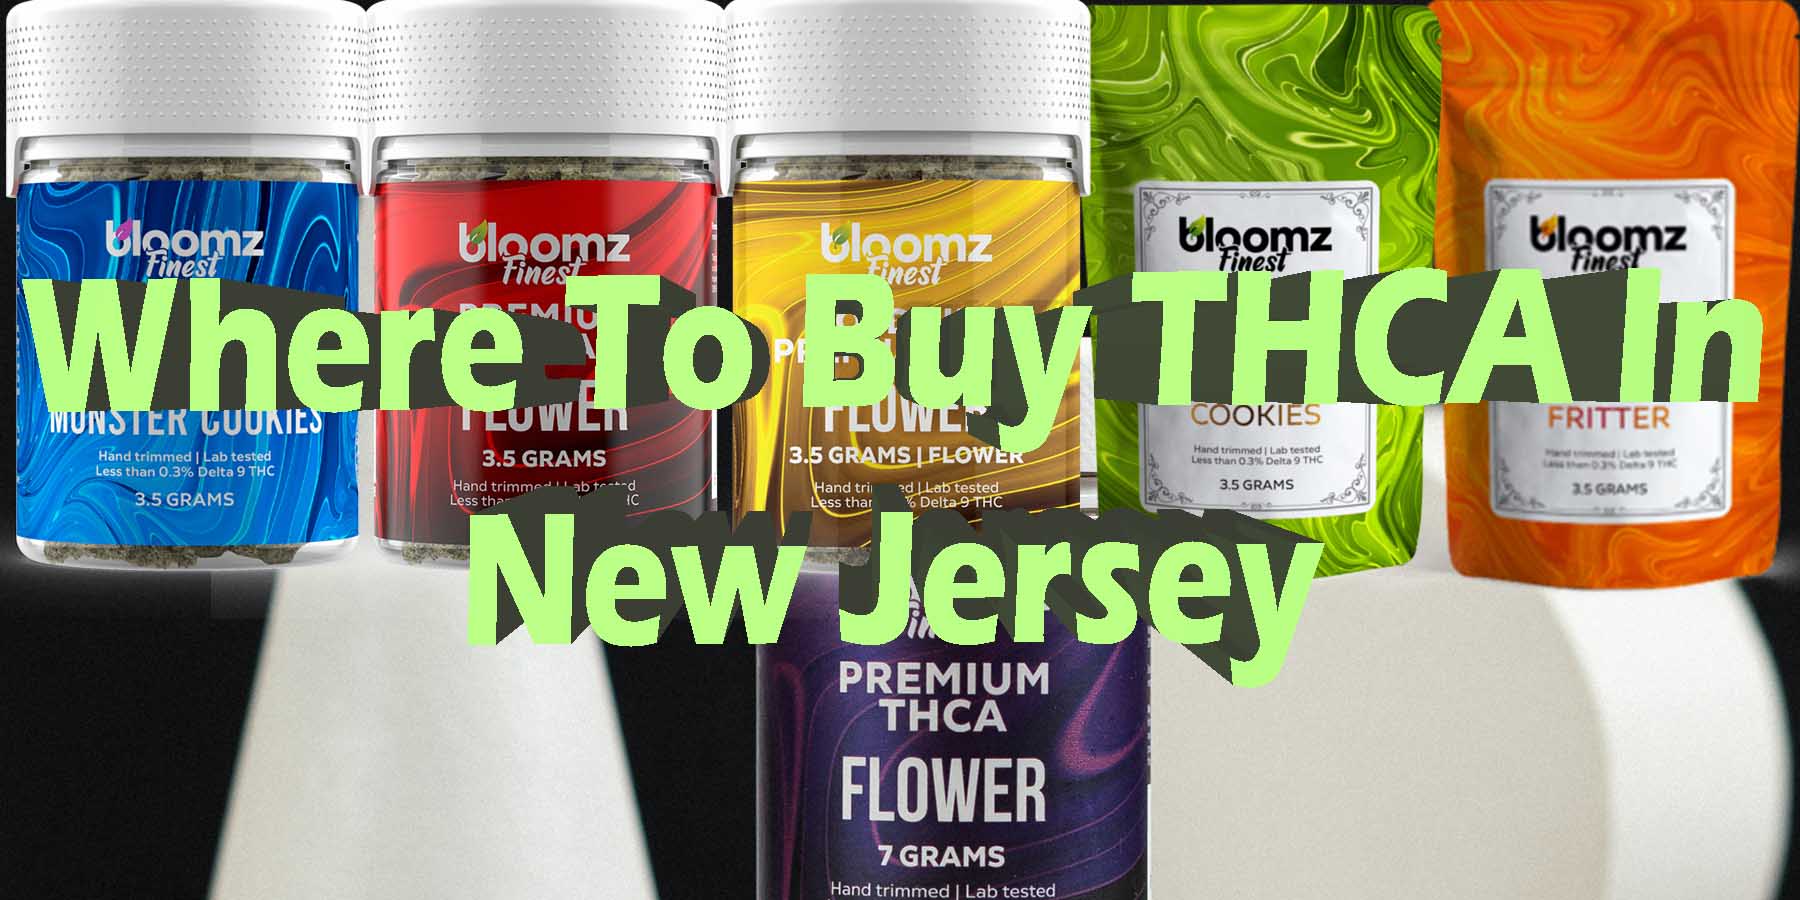 Where To Buy THCA In New Jersey WhereToGet HowToGetNearMe BestPlace LowestPrice Coupon Discount For Smoking Best High Smoke Shop Online Near Me StrongestBrand BestBrand Binoid Bloomz